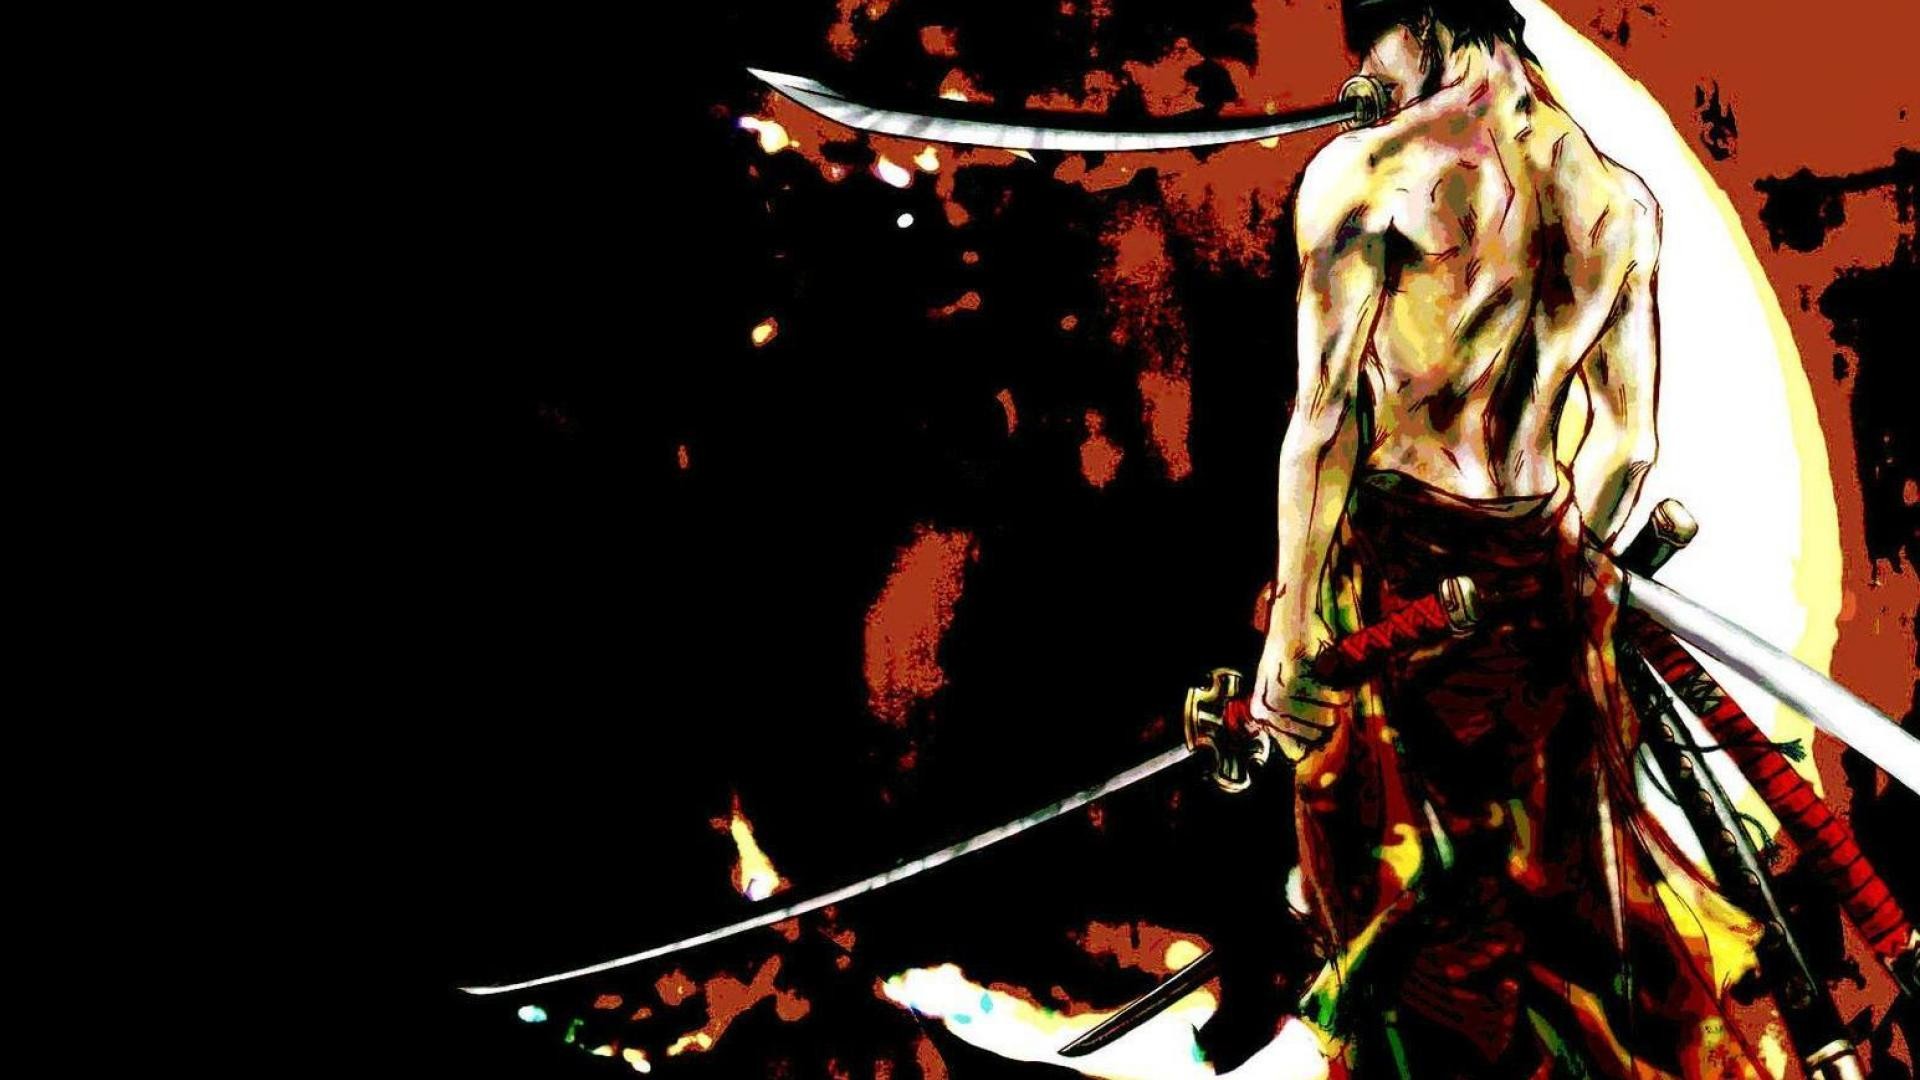 1920x1080 Images For Gt One Piece Wallpaper Zoro Roronoa Zoro Wallpaper Iphone   Live New World Widescreen